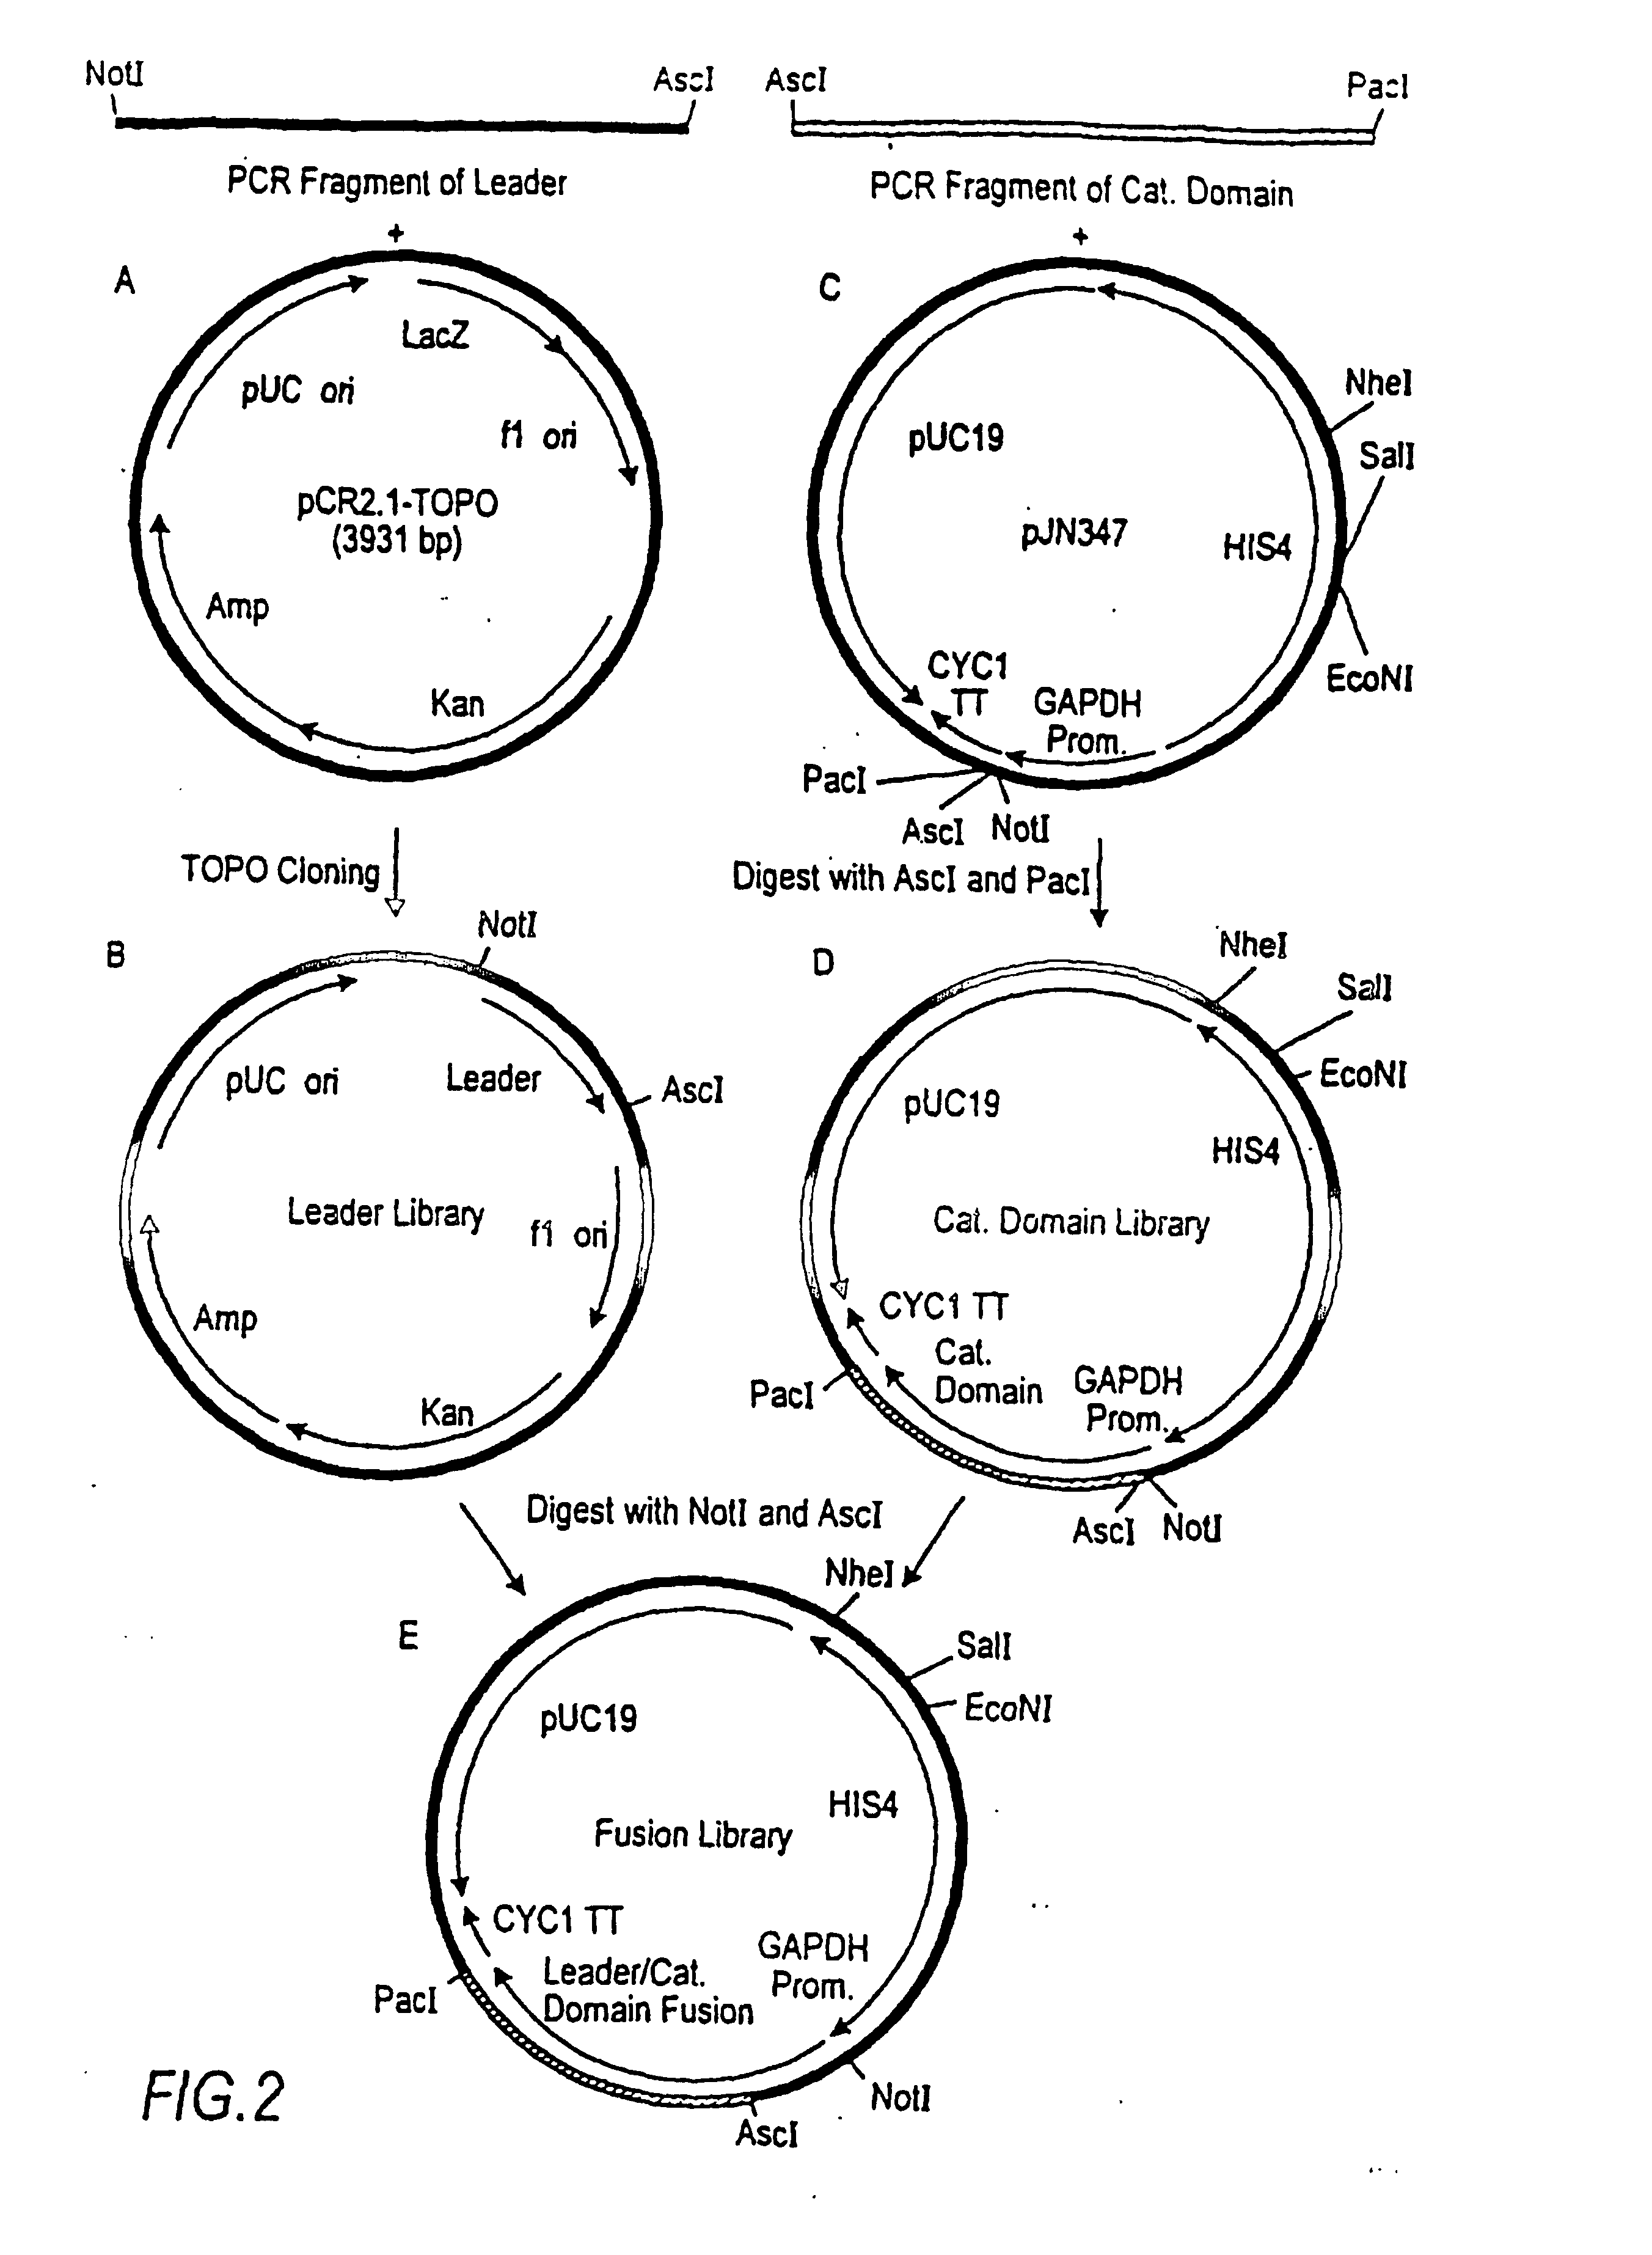 Production of modified glycoproteins having multiple antennary structures